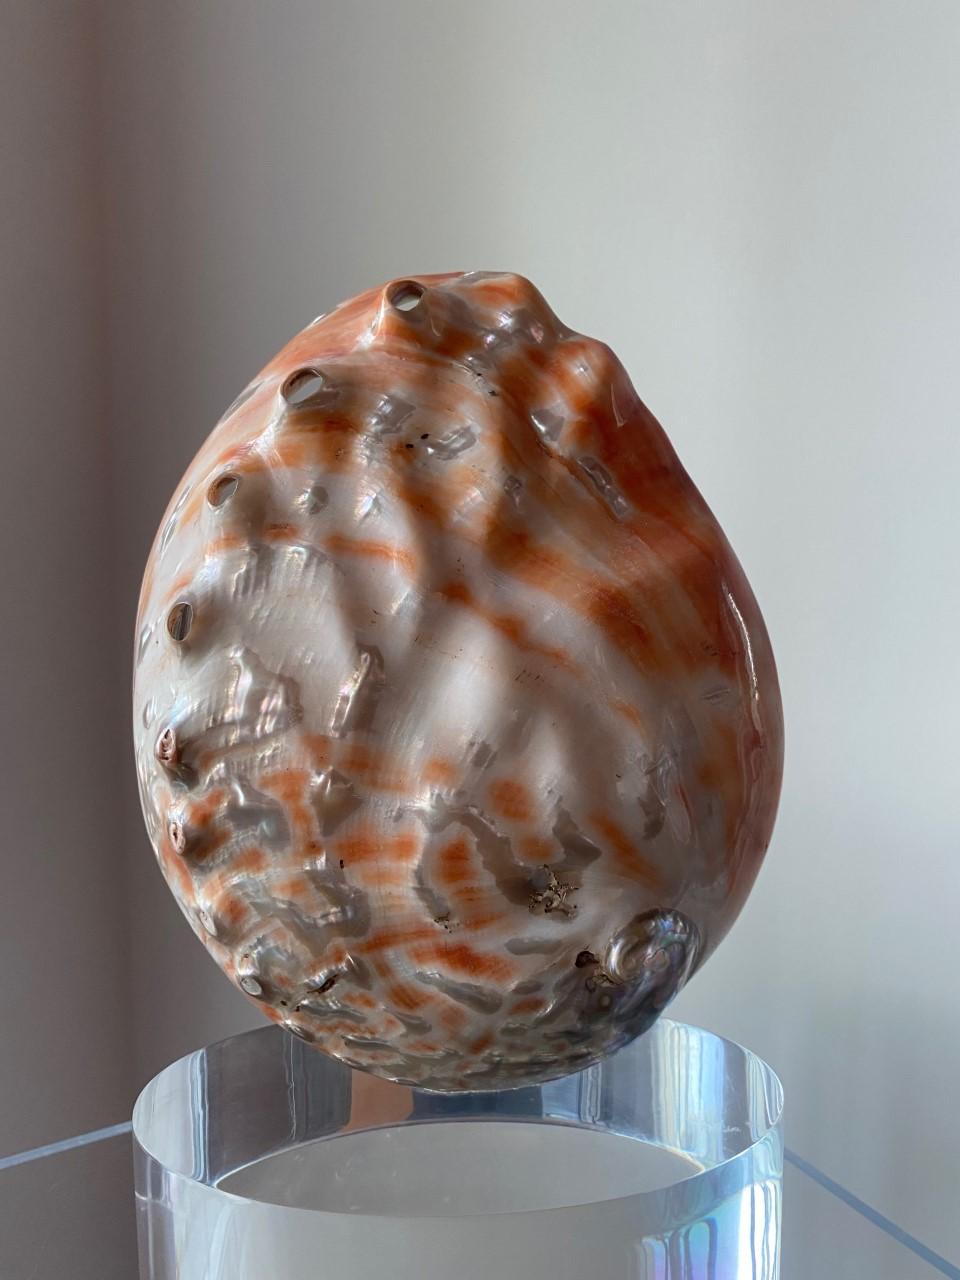 Organic Modernist Sculptural Clam Shell on Lucite Base Sculpture In Good Condition For Sale In San Diego, CA